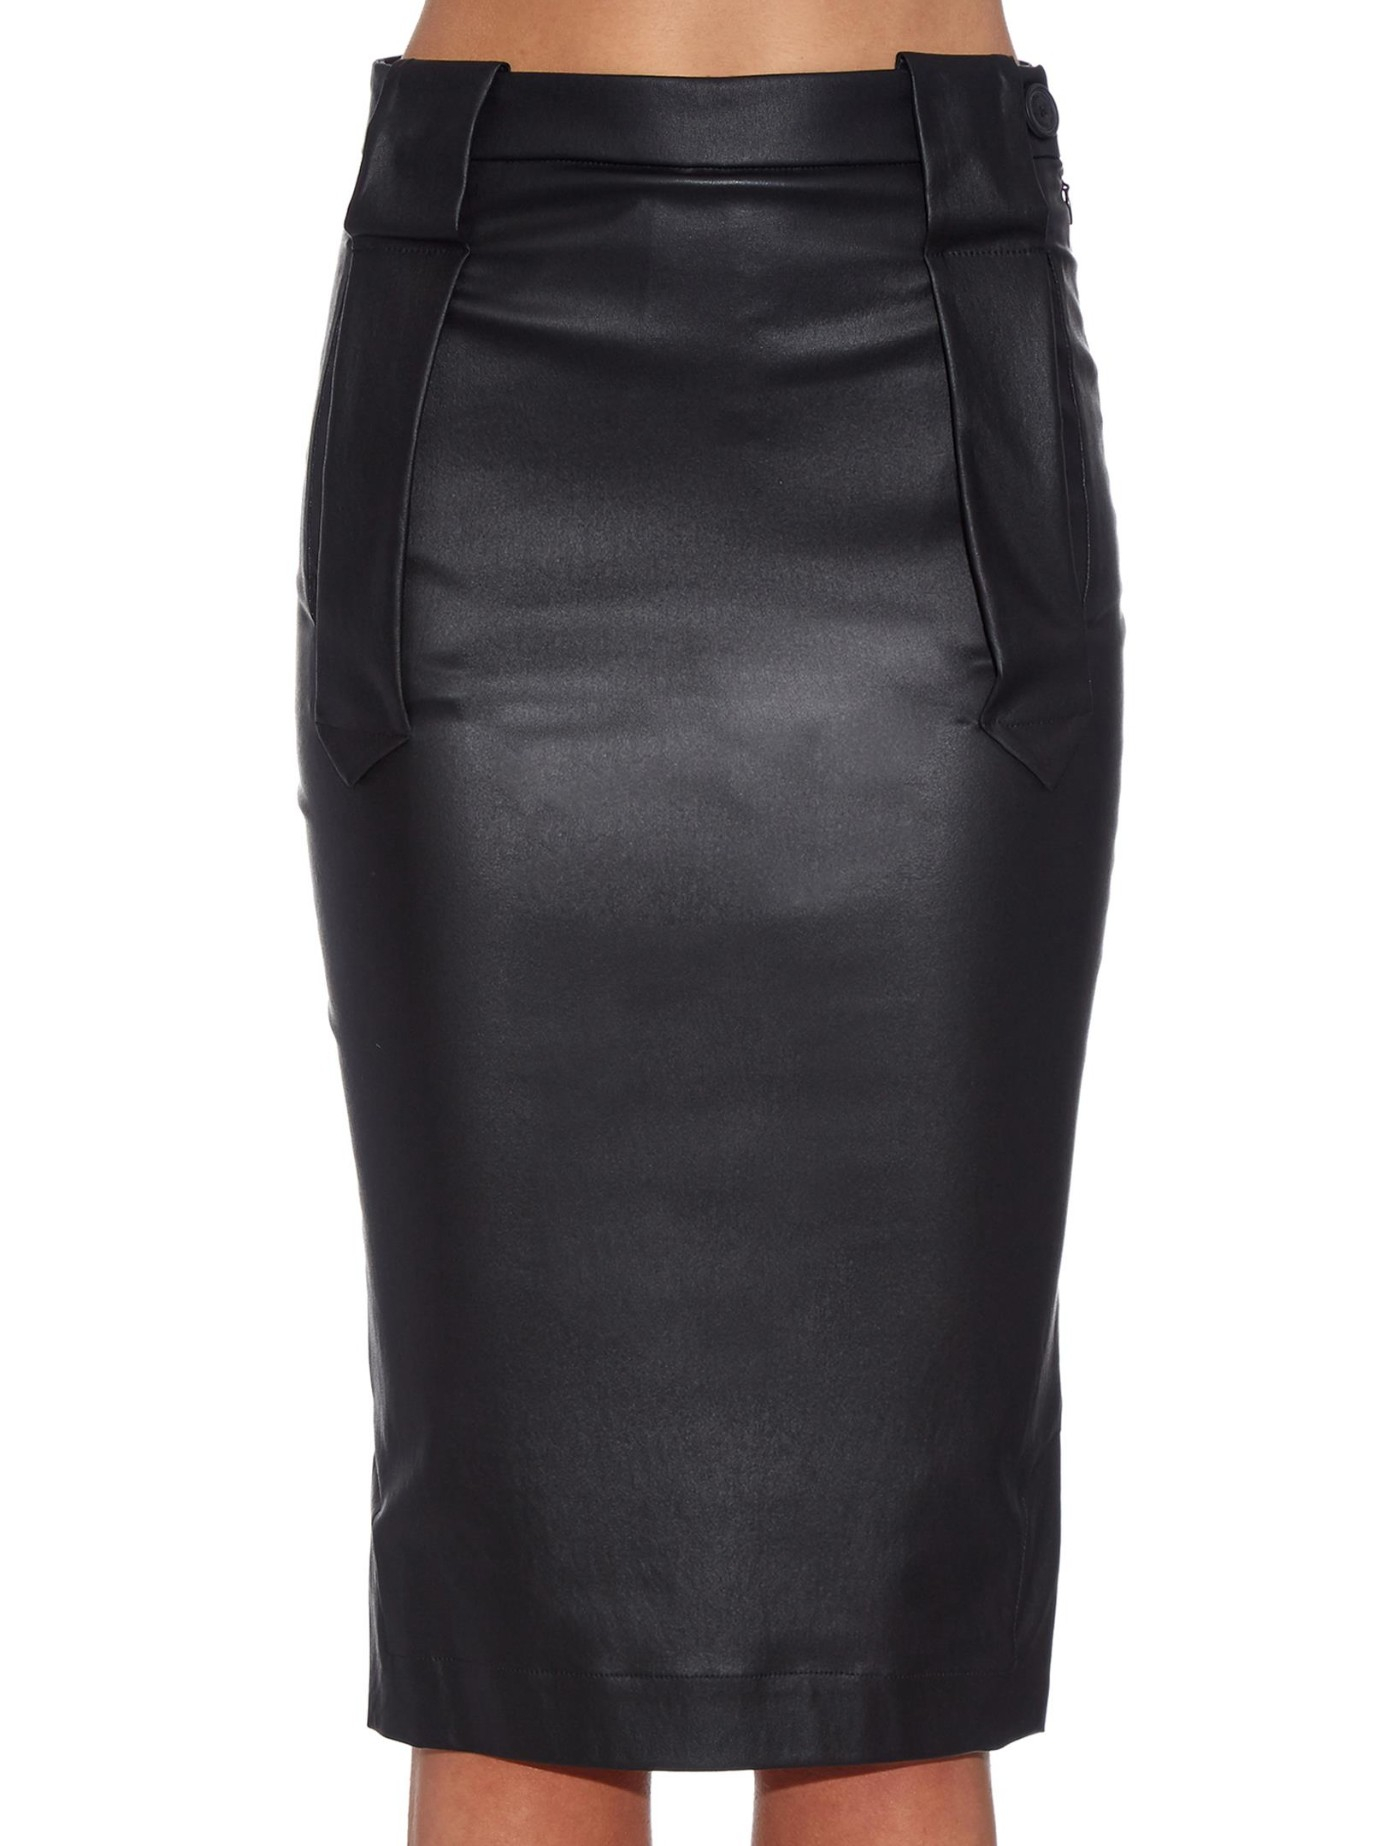 Lyst - Vivienne Westwood Anglomania Fall Wet-Look Pencil Skirt in Black